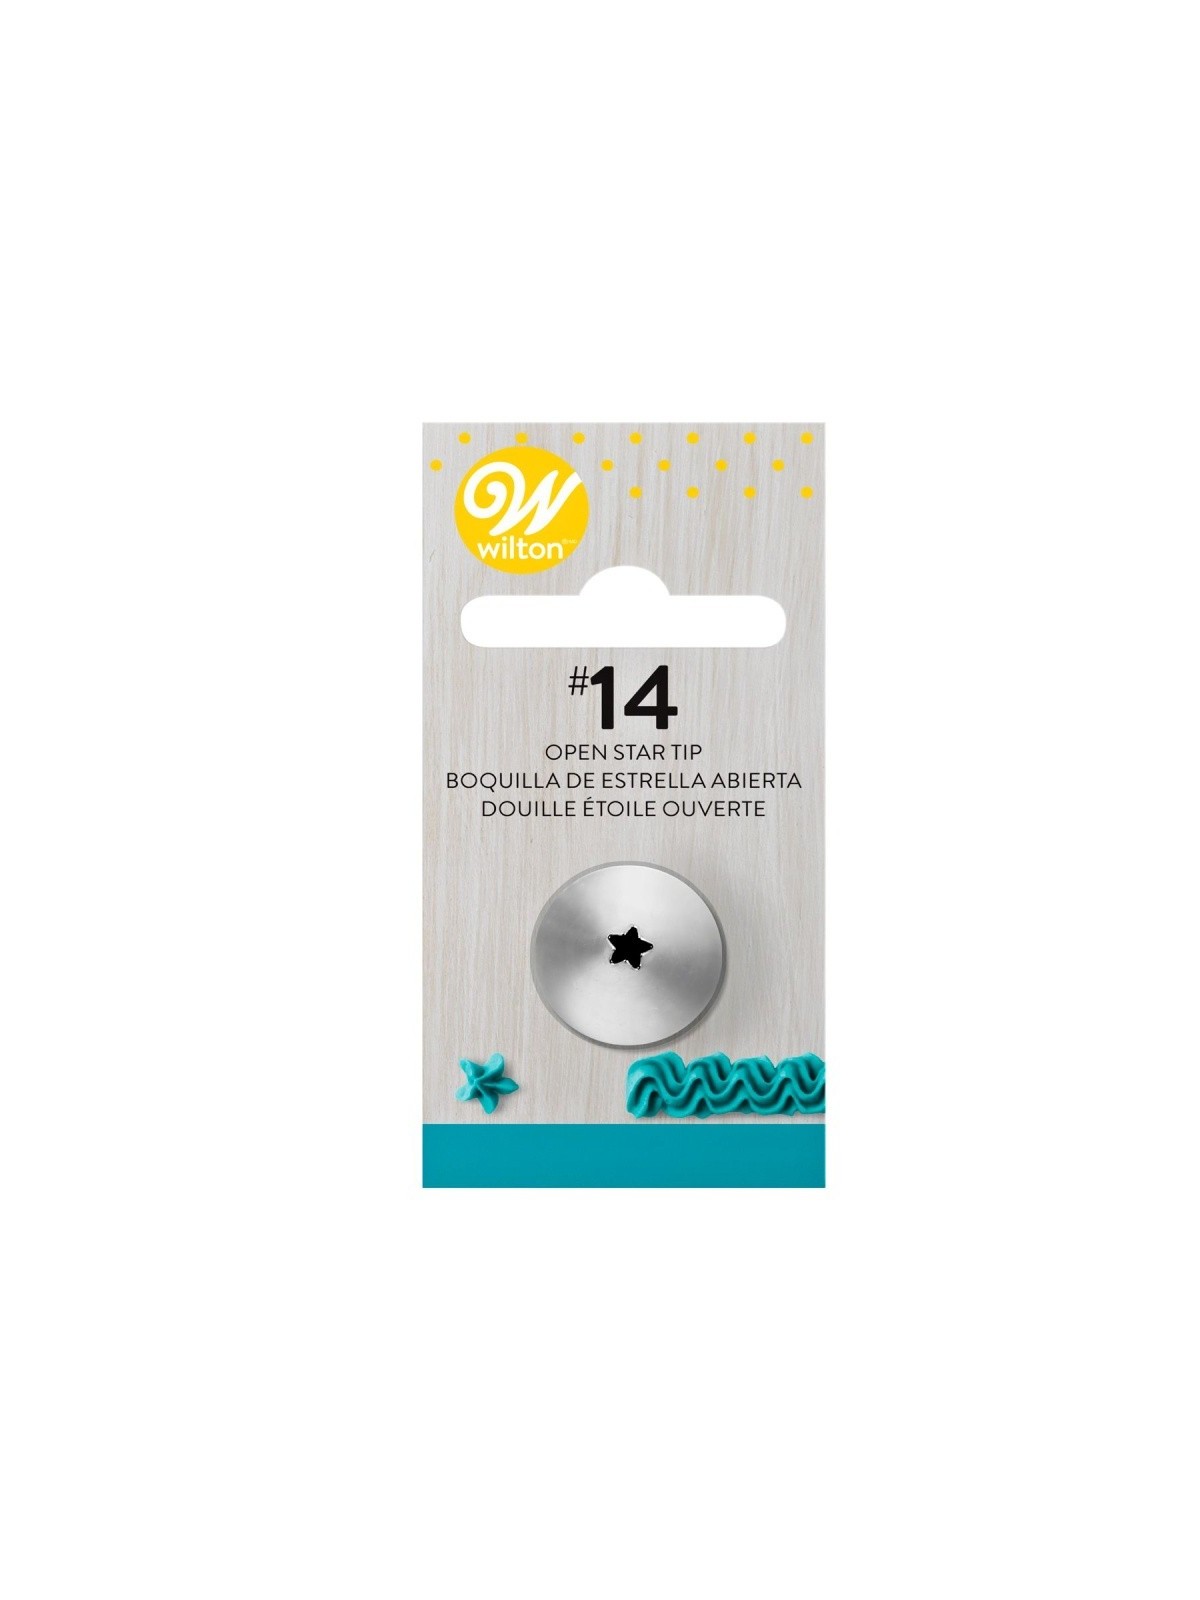 Wilton Decorating Tip 014 Open Star carded